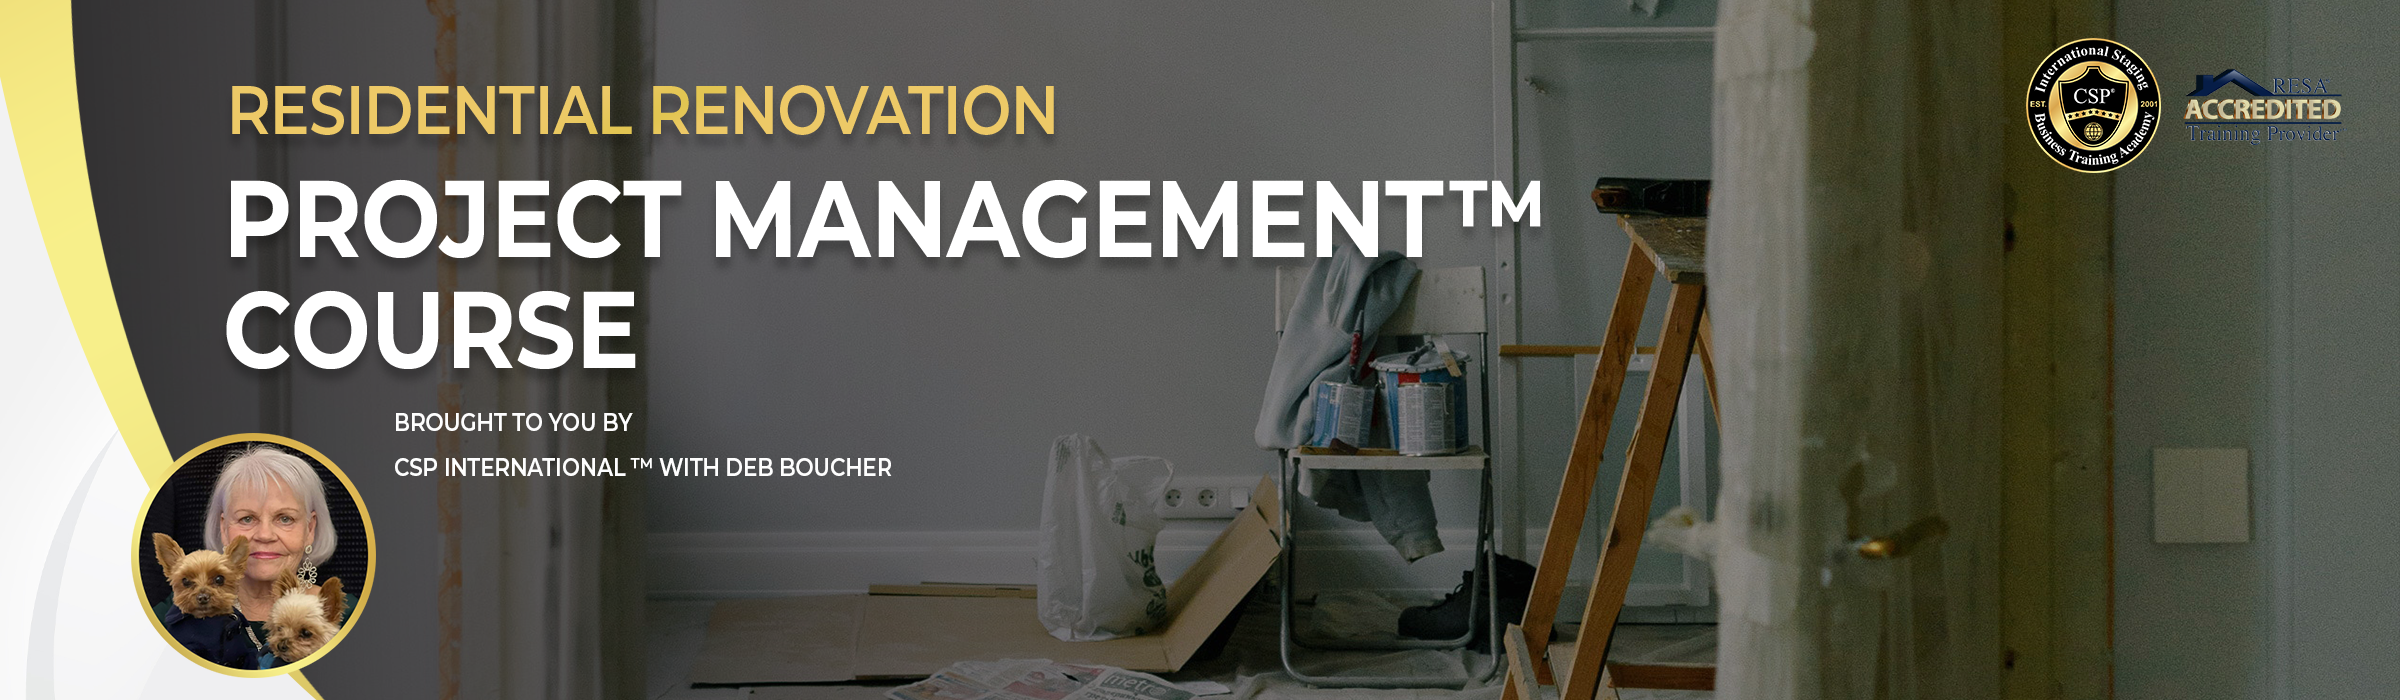 residential renovation project management course 